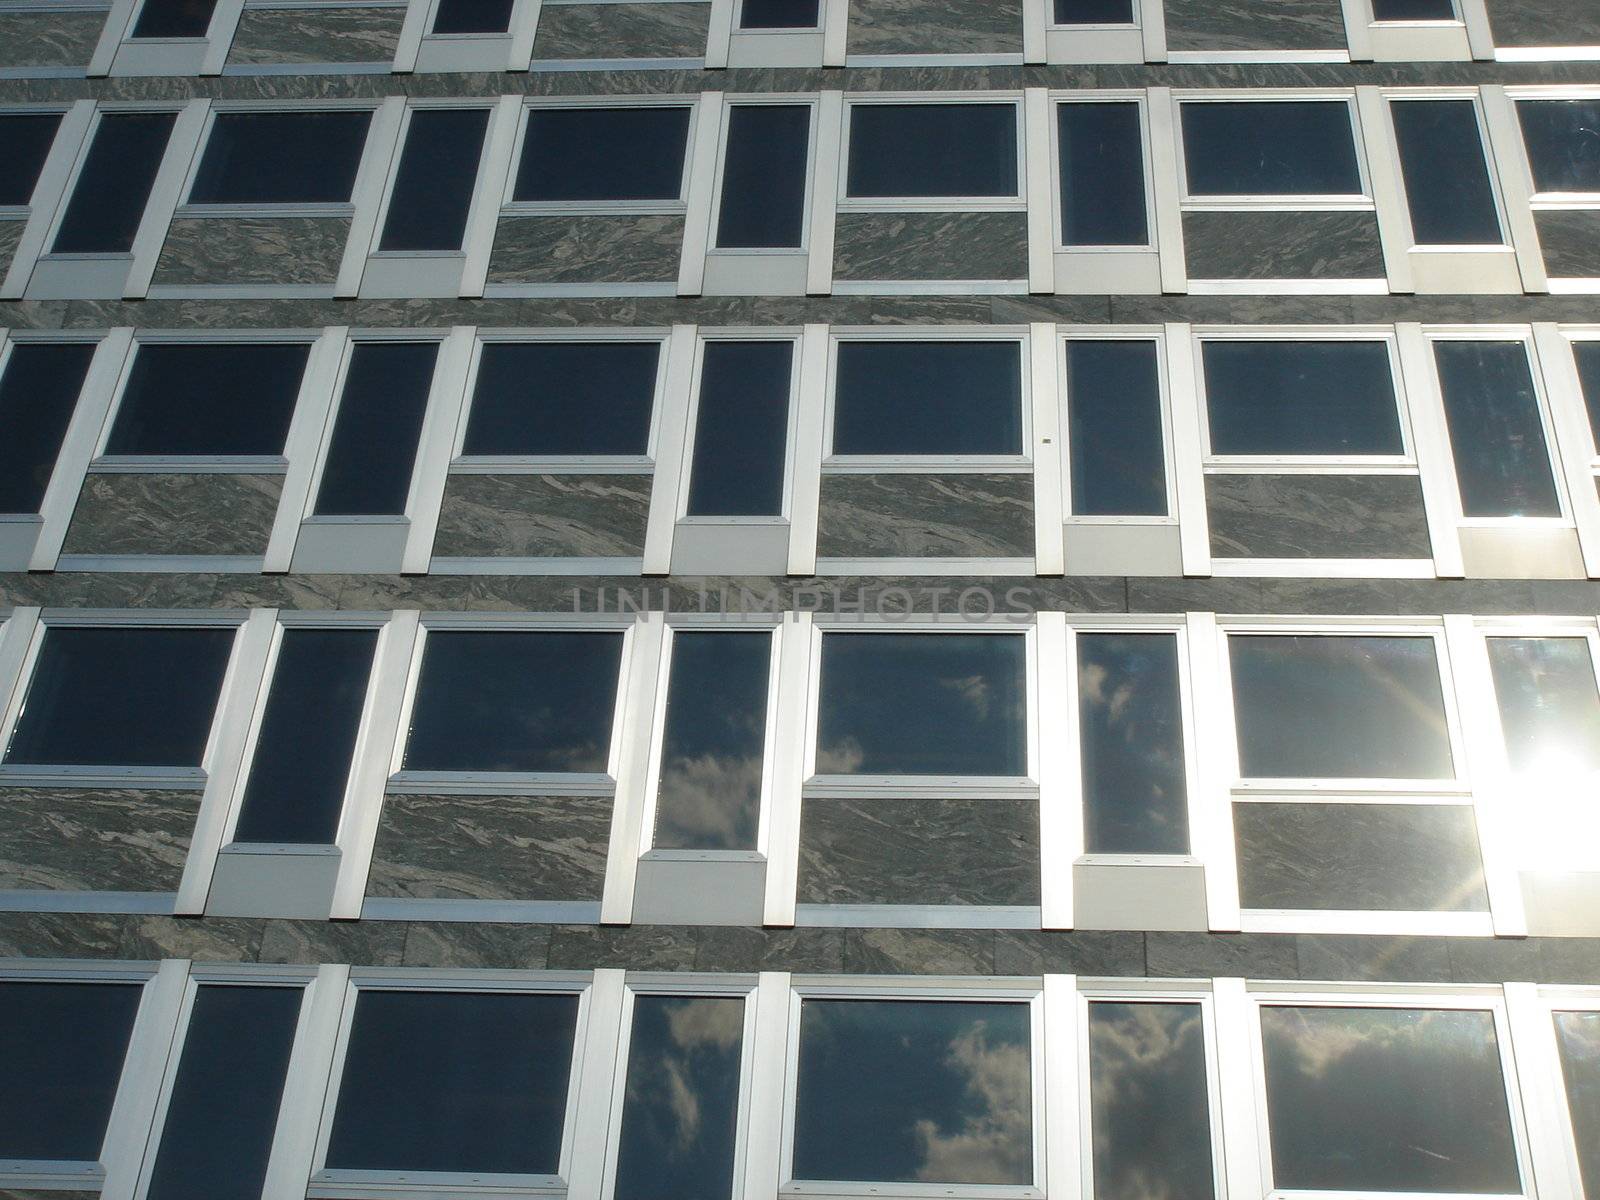 Glassed modern metallic facade of business building